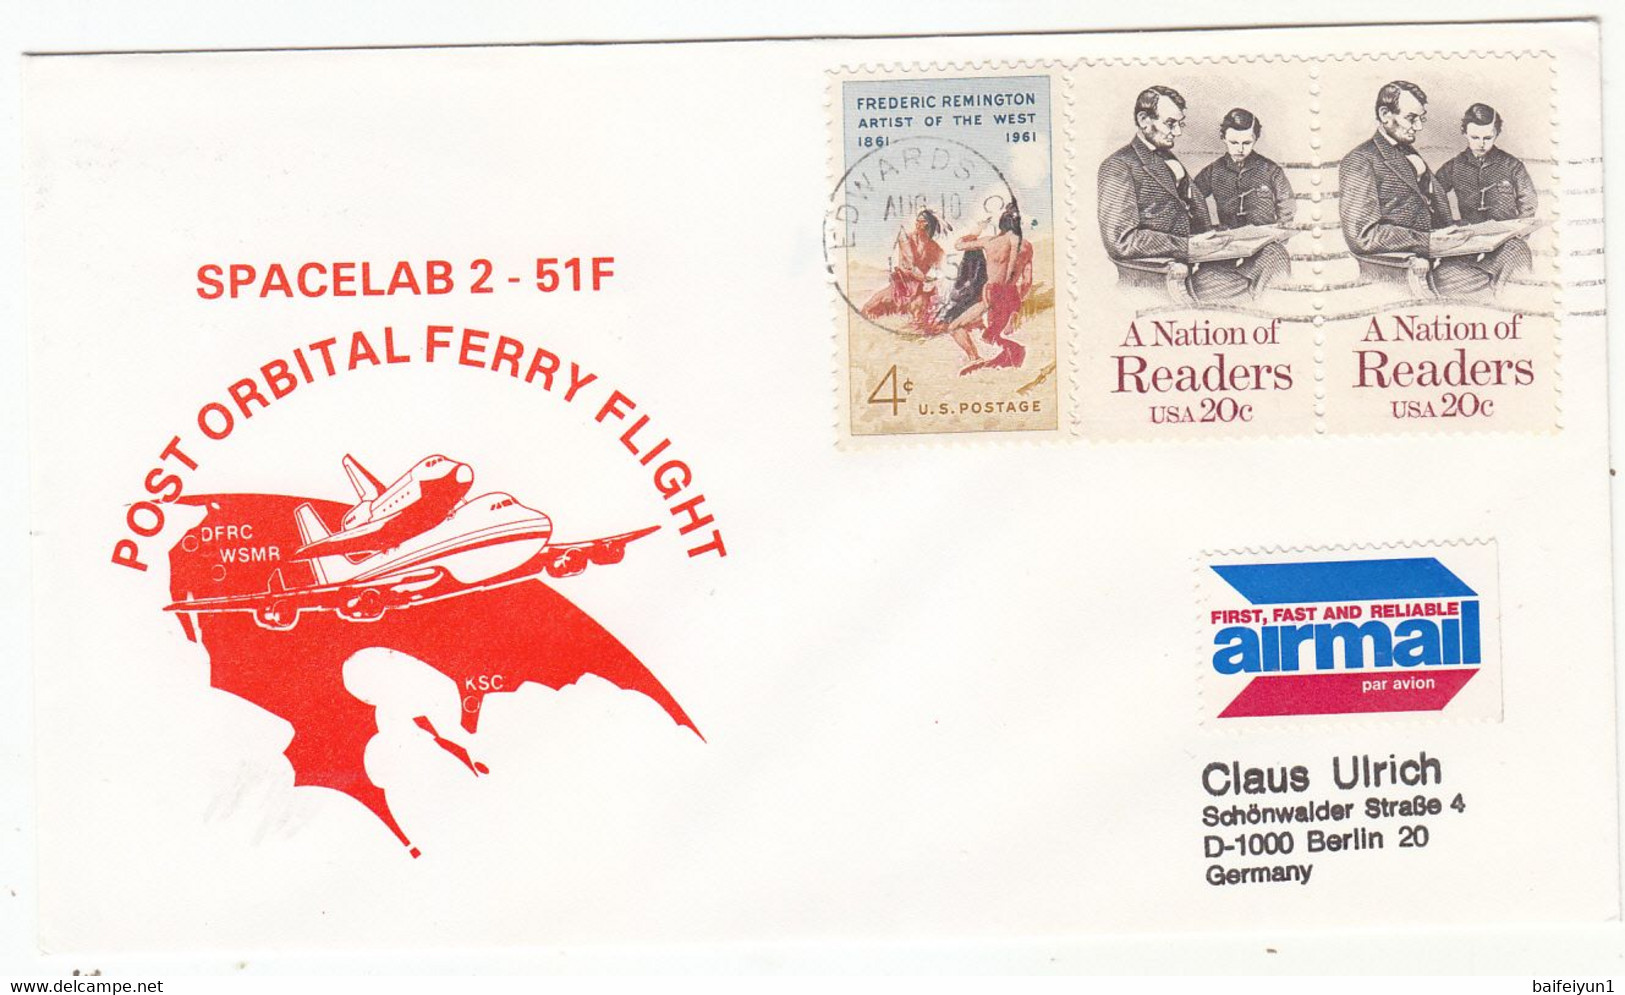 1985 USA  Space Shuttle Challenger STS-51F Mission And Post Orbit Ferry Flight Commemorative Cover - Nordamerika